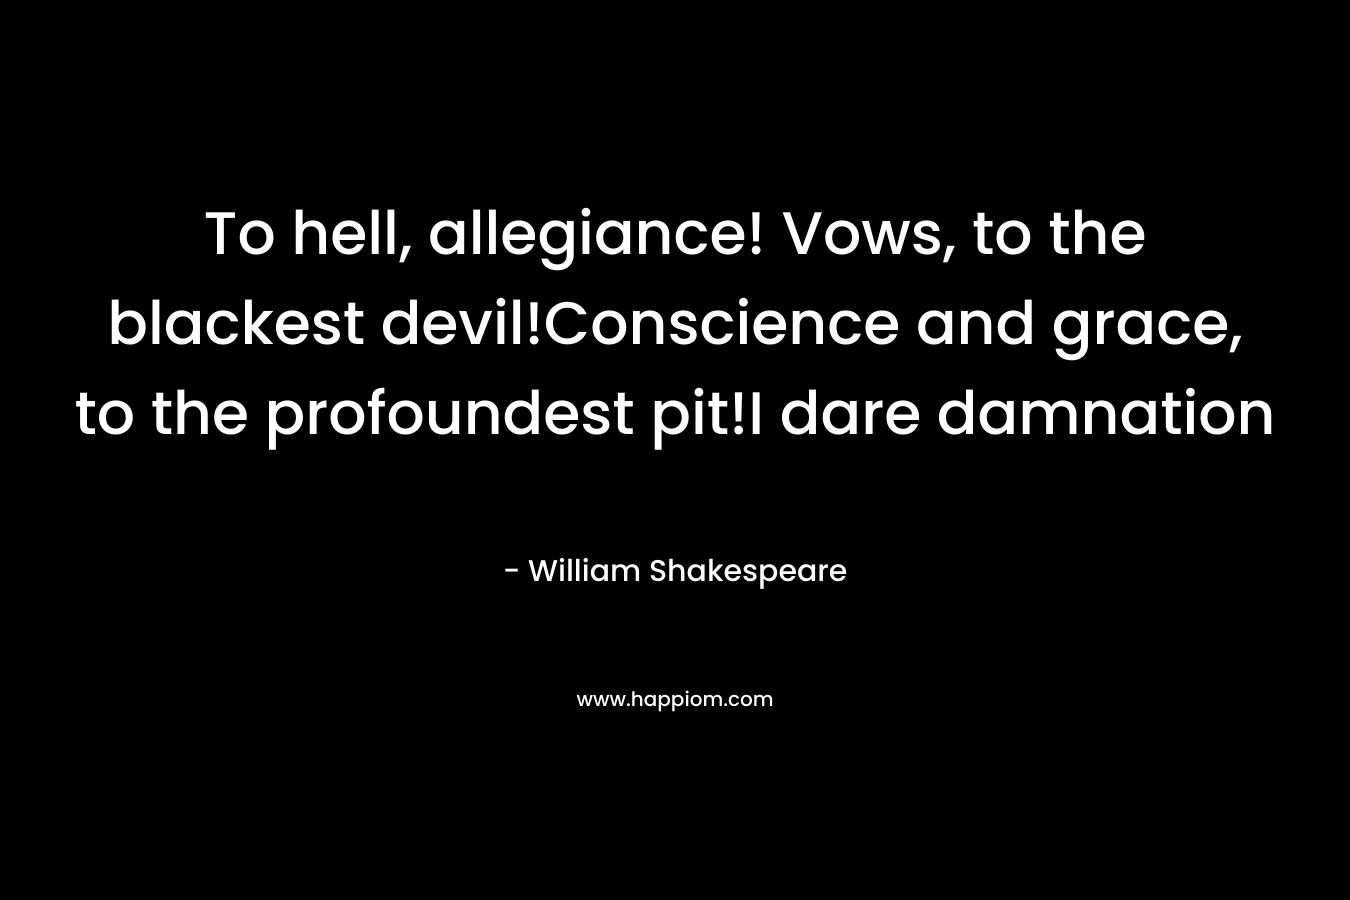 To hell, allegiance! Vows, to the blackest devil!Conscience and grace, to the profoundest pit!I dare damnation